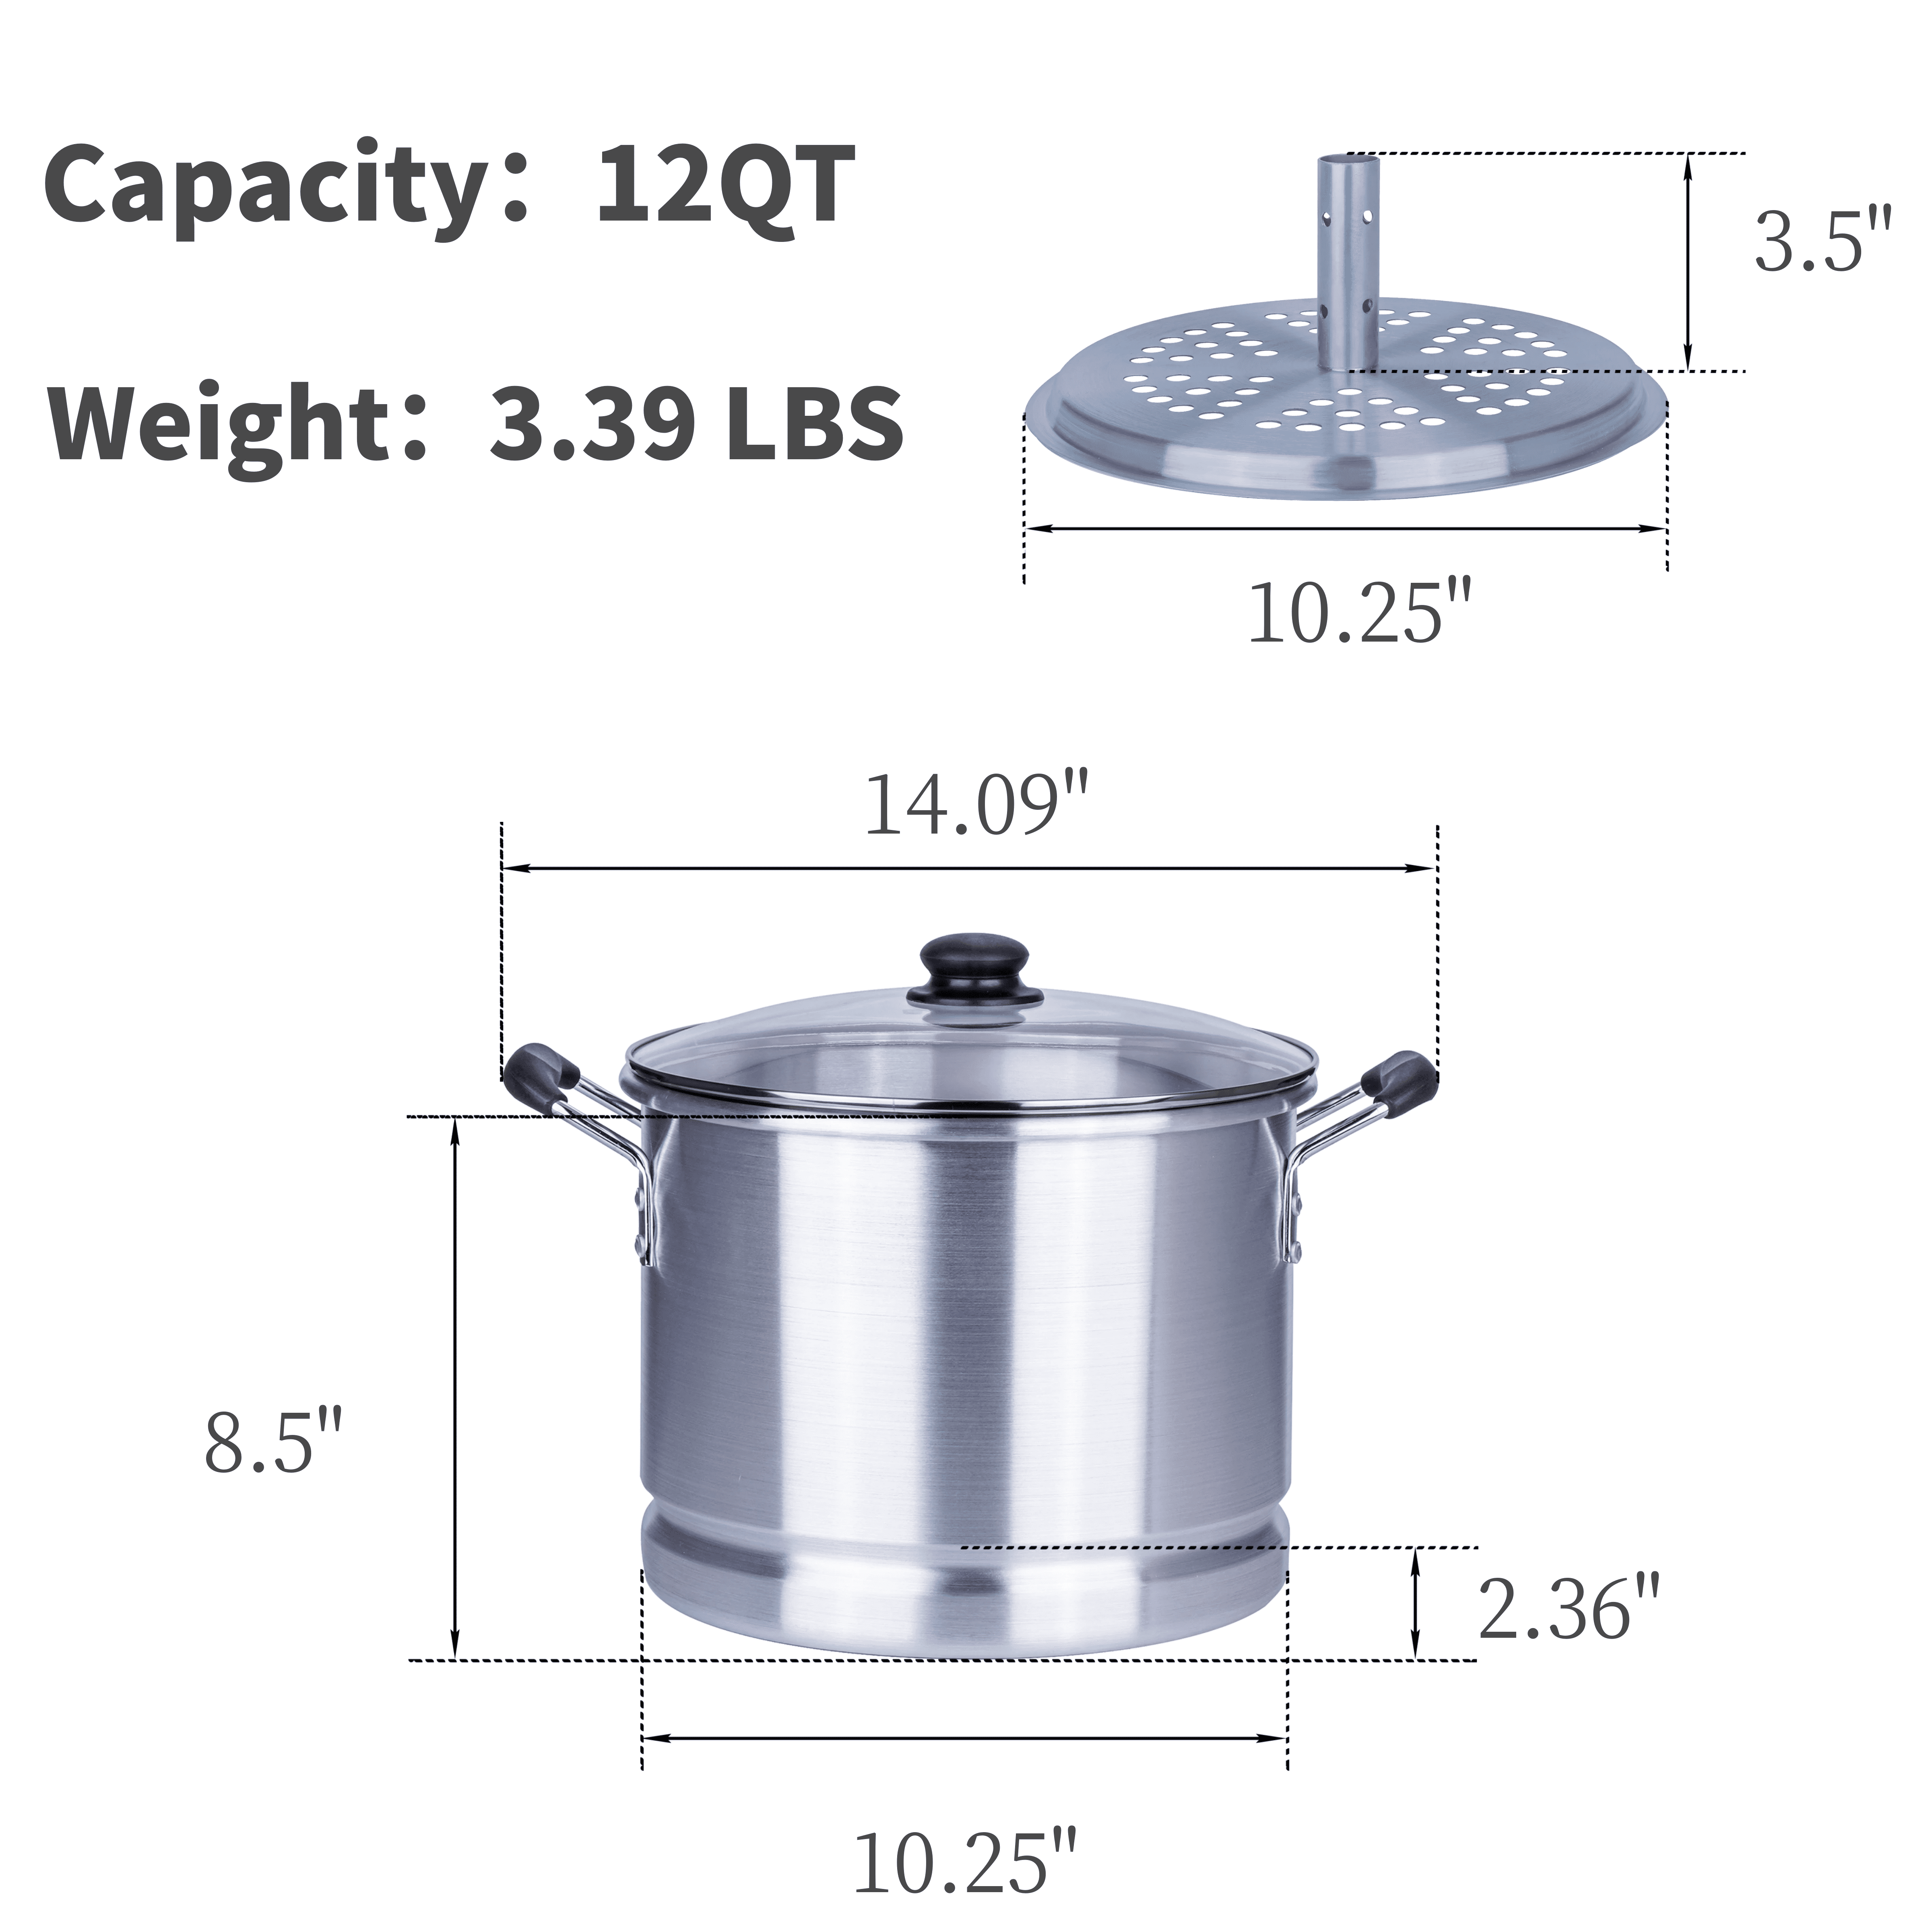  Large 32QT Steamer Boiler with 21QT Steaming Basket and Glass  Lid: Home & Kitchen